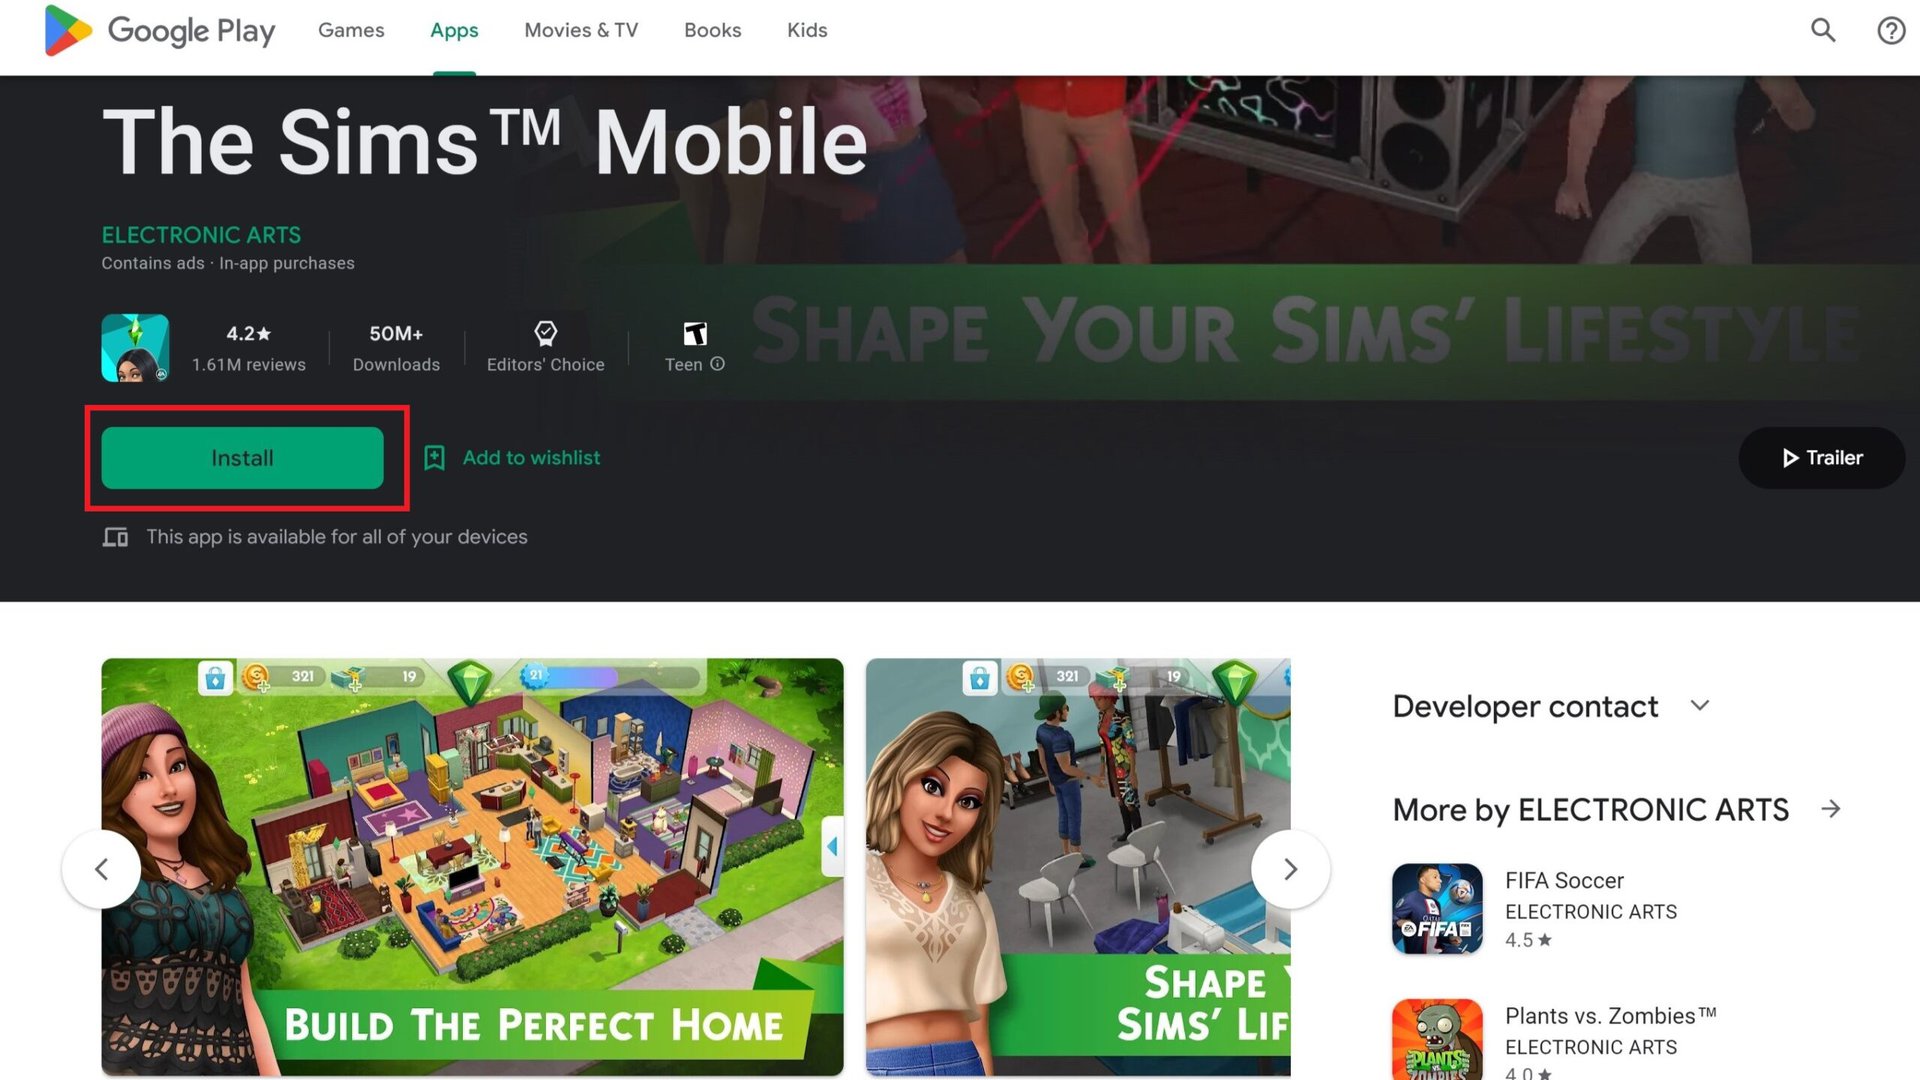 The Sims Mobile App Review